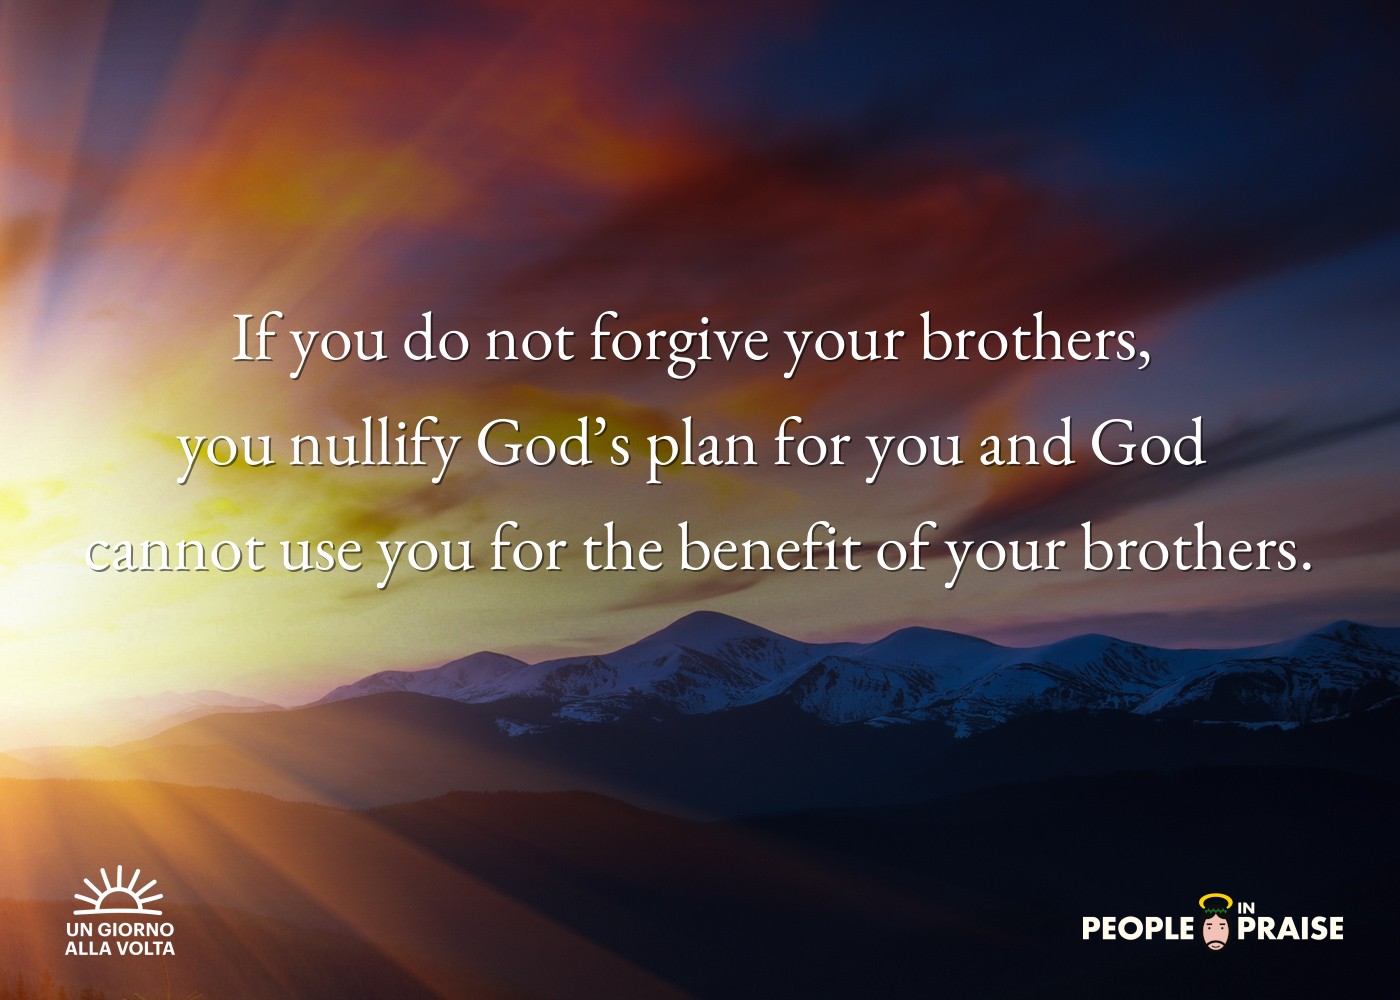 If you do not forgive your brothers, 
you nullify God’s plan for you and God 
cannot use you for the benefit of your brothers.
